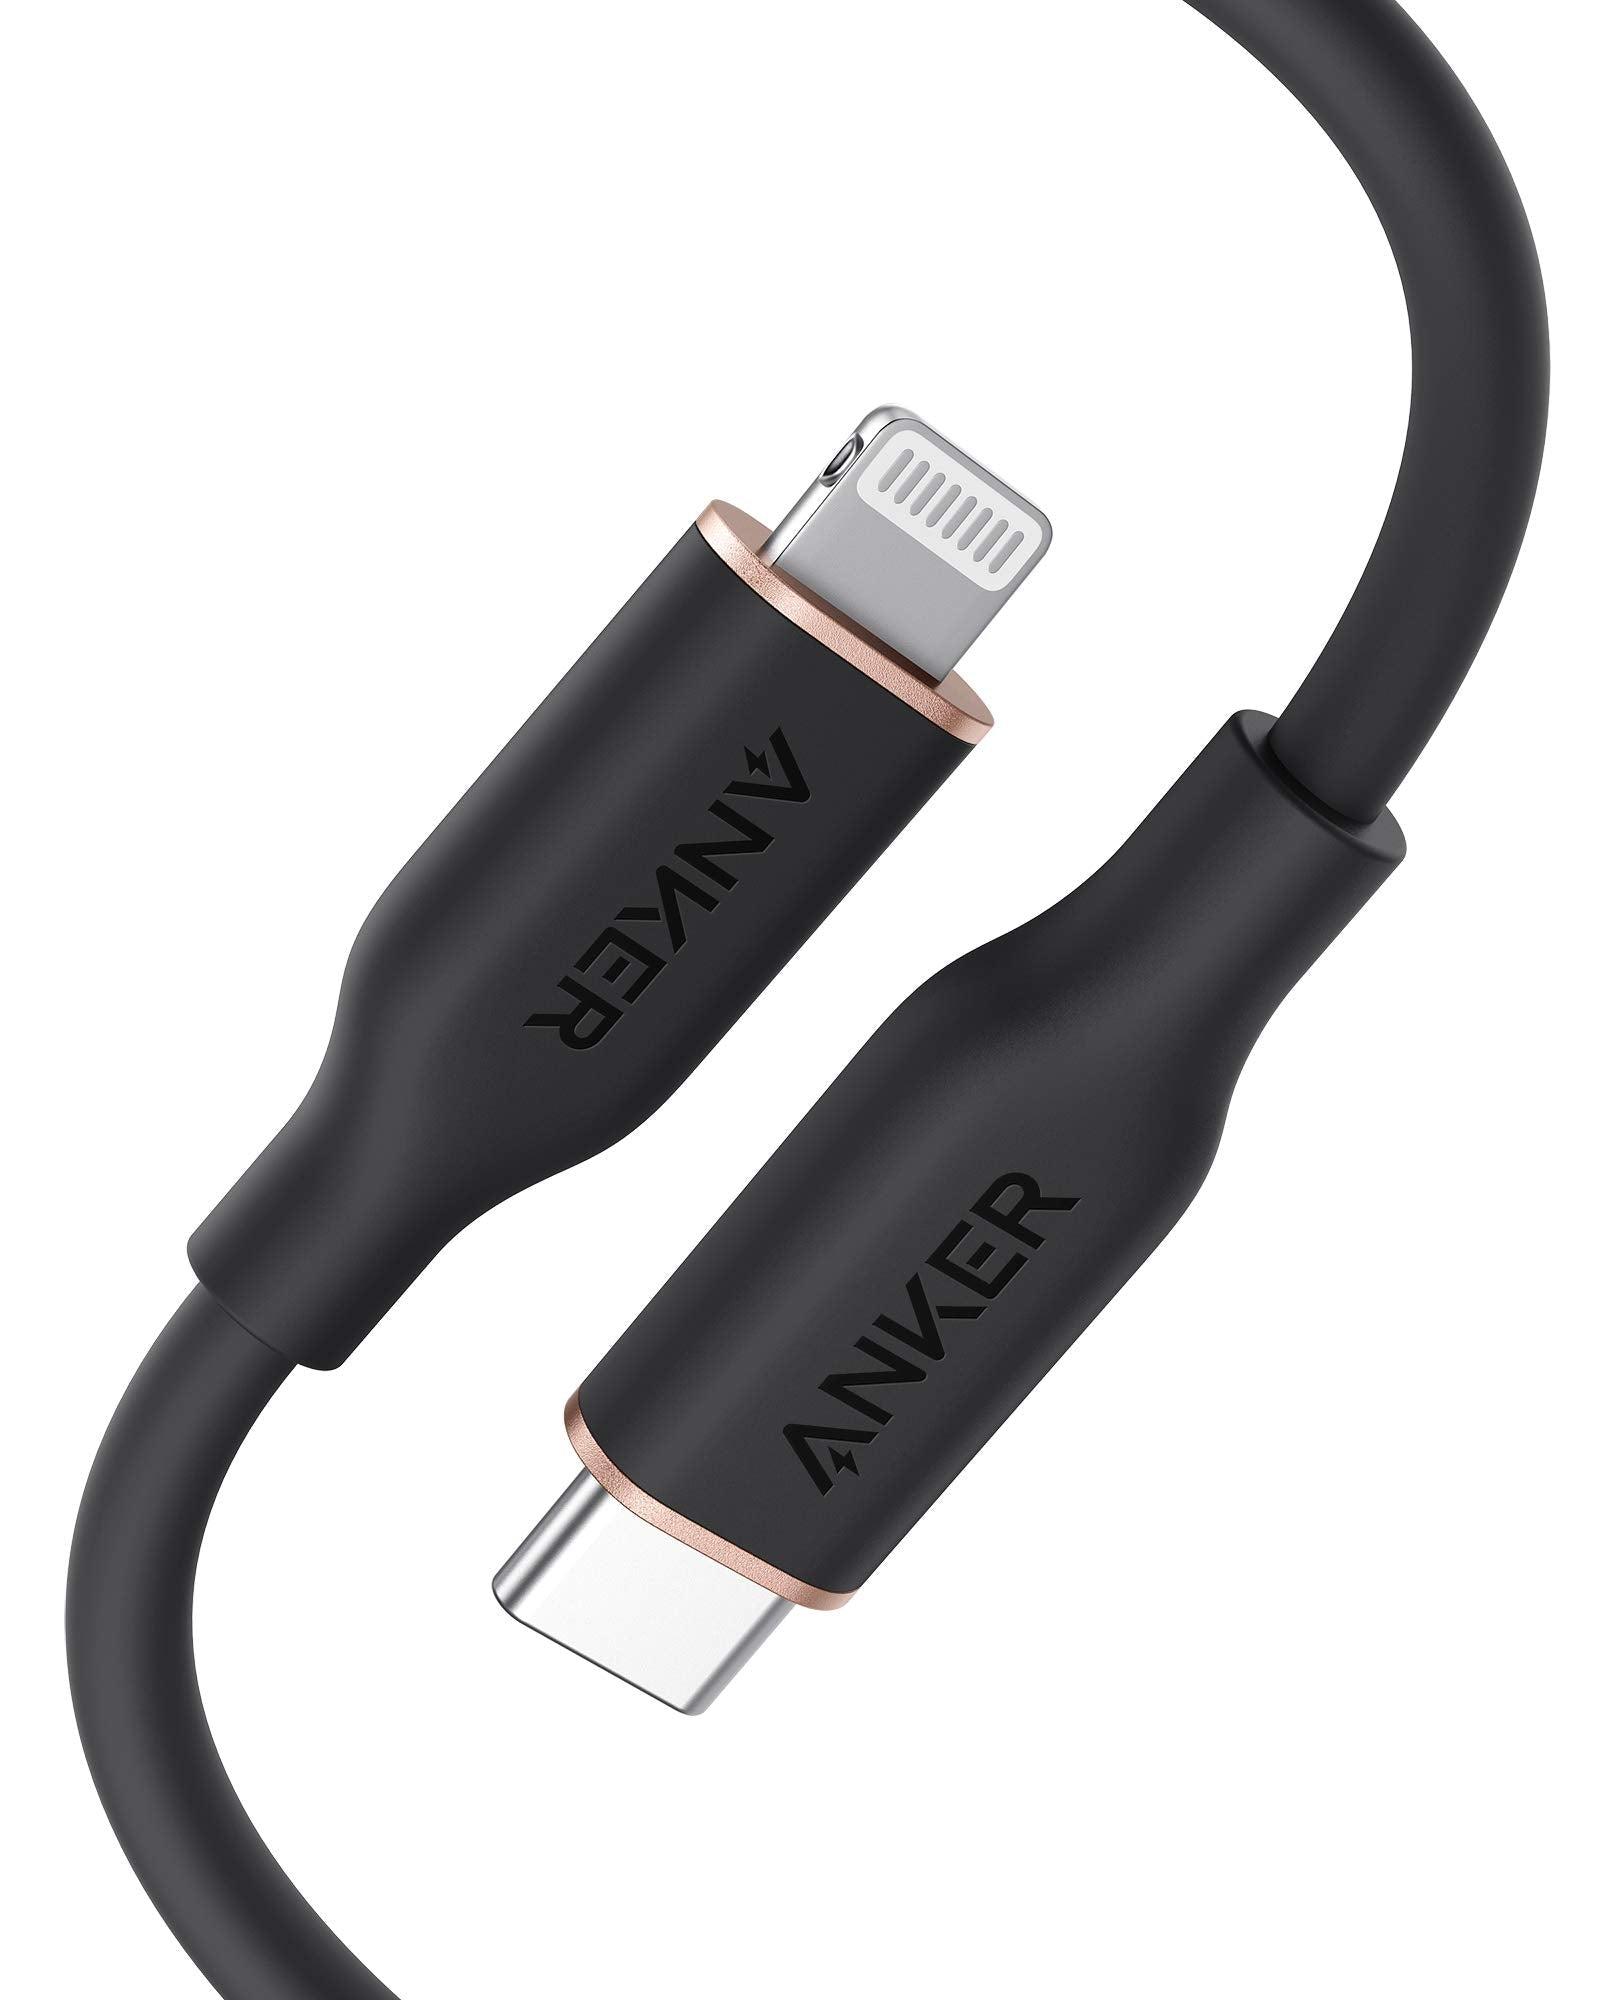 Anker <b>641</b> USB-C to Lightning Cable (Flow, Silicone)